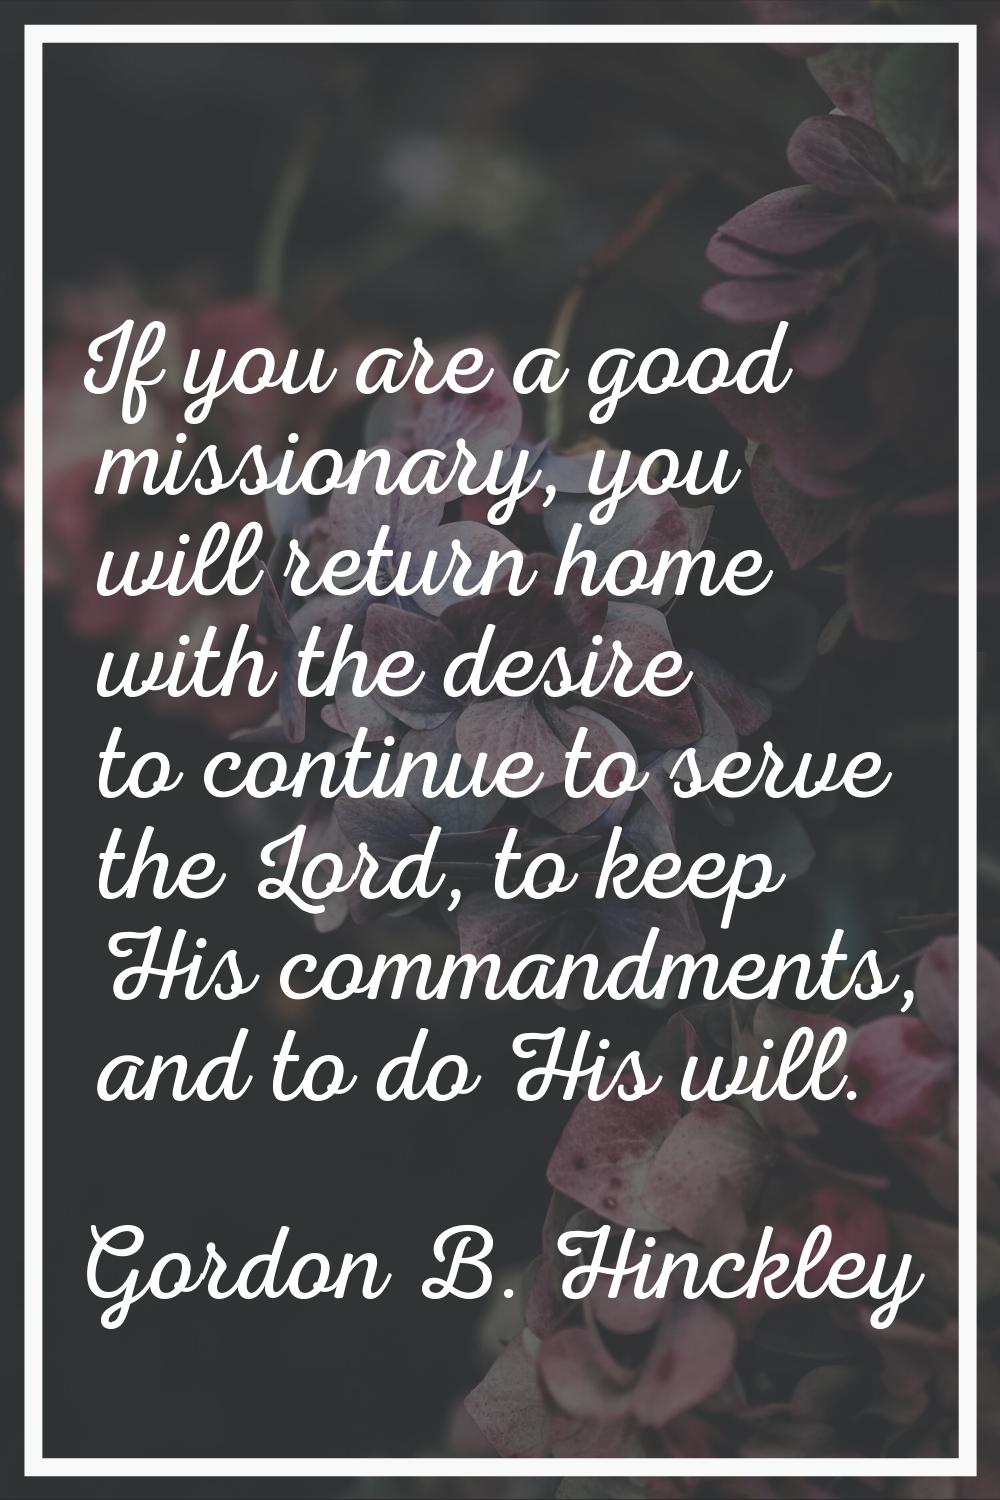 If you are a good missionary, you will return home with the desire to continue to serve the Lord, t